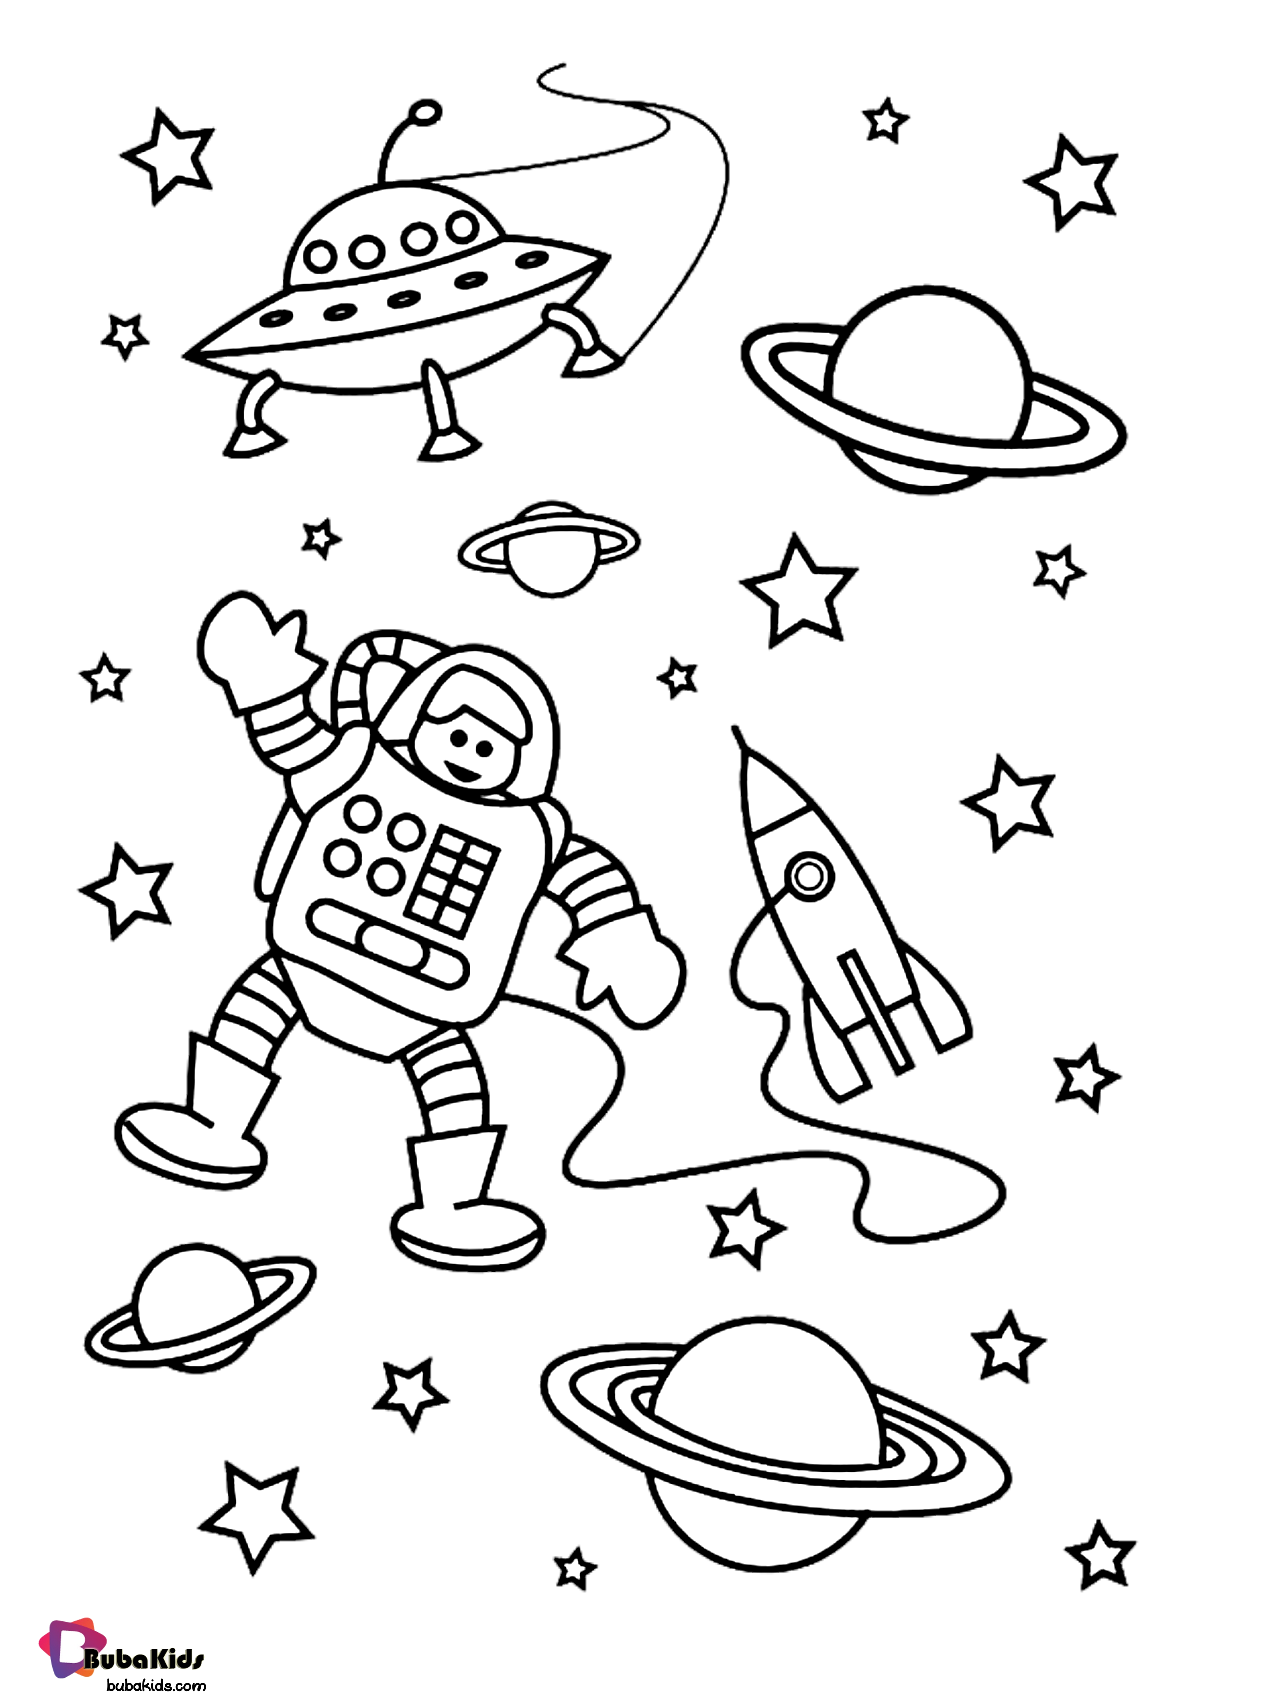 Astronaut in outer space coloring page Wallpaper